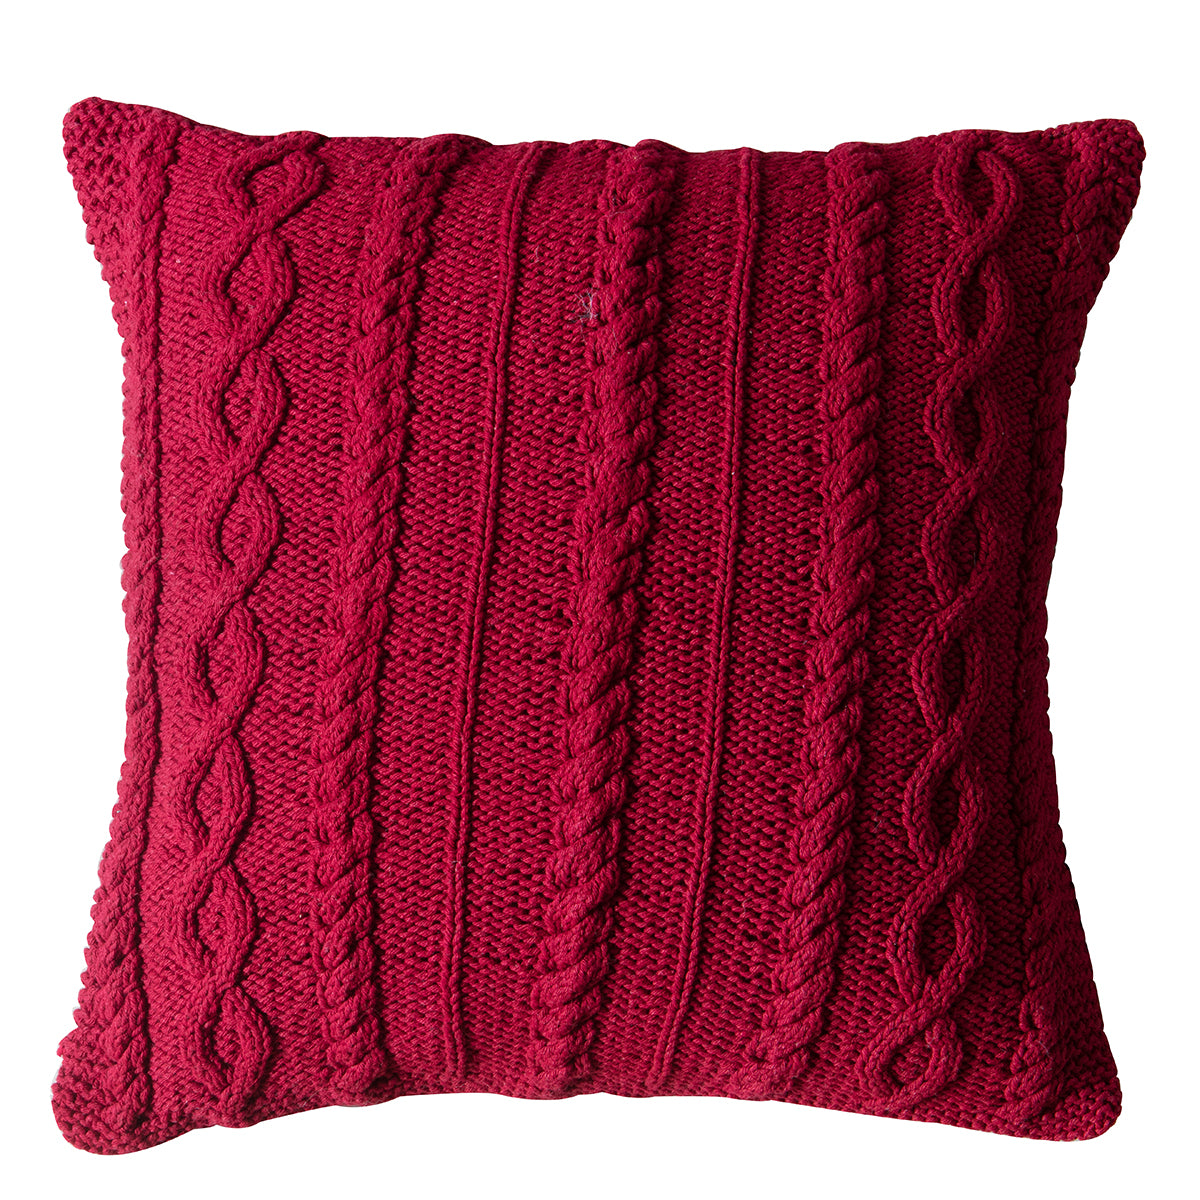 Walton Cable Knit Cushion Red 450x450mm